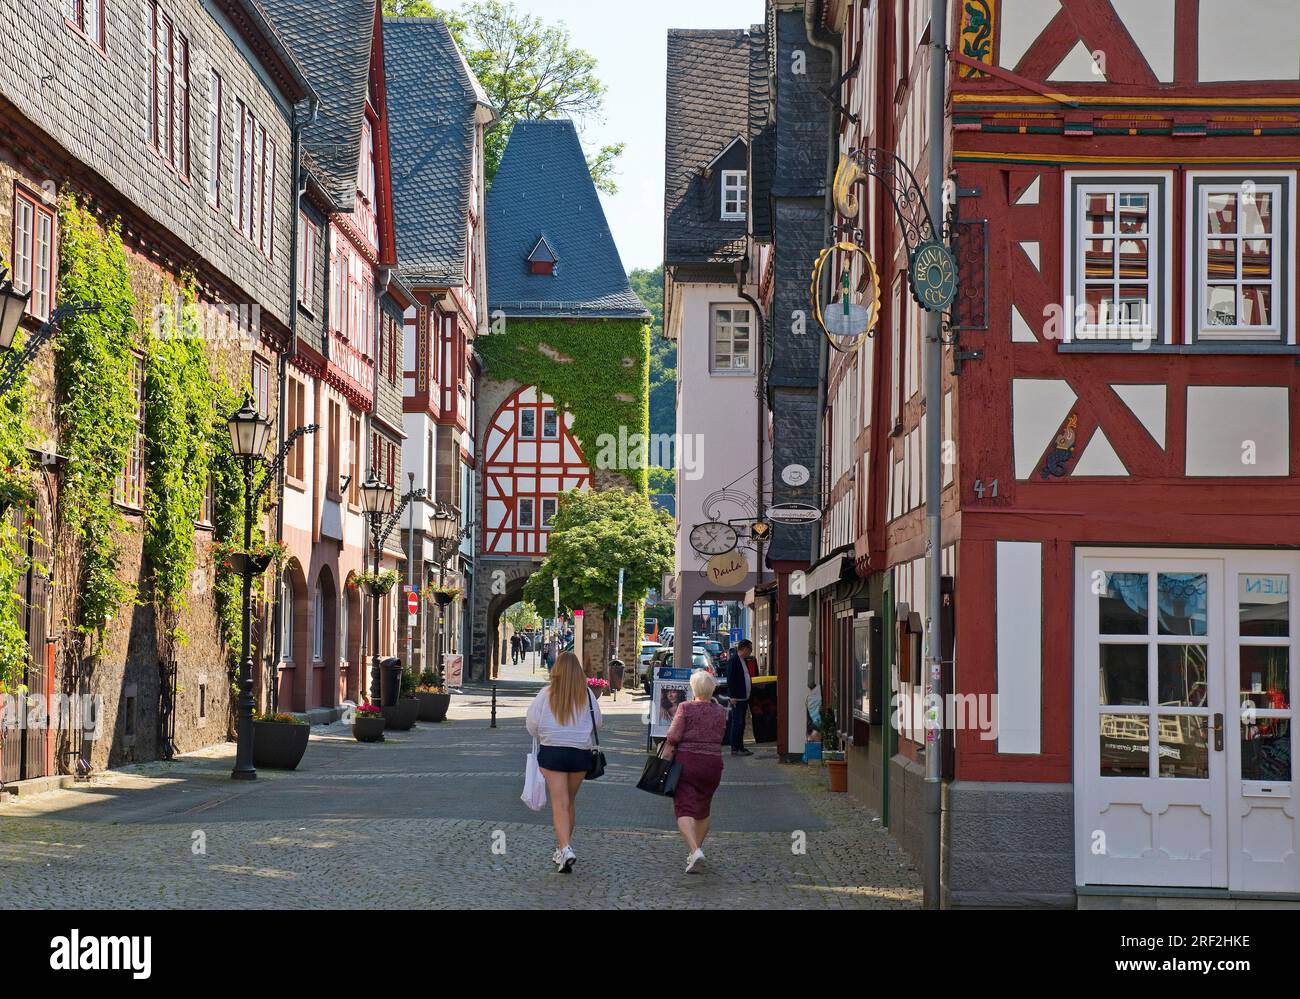 town hall with half-timbered houses and town gate Leonhardsturm in the historic old town, Germany, Hesse, Herborn Stock Photo